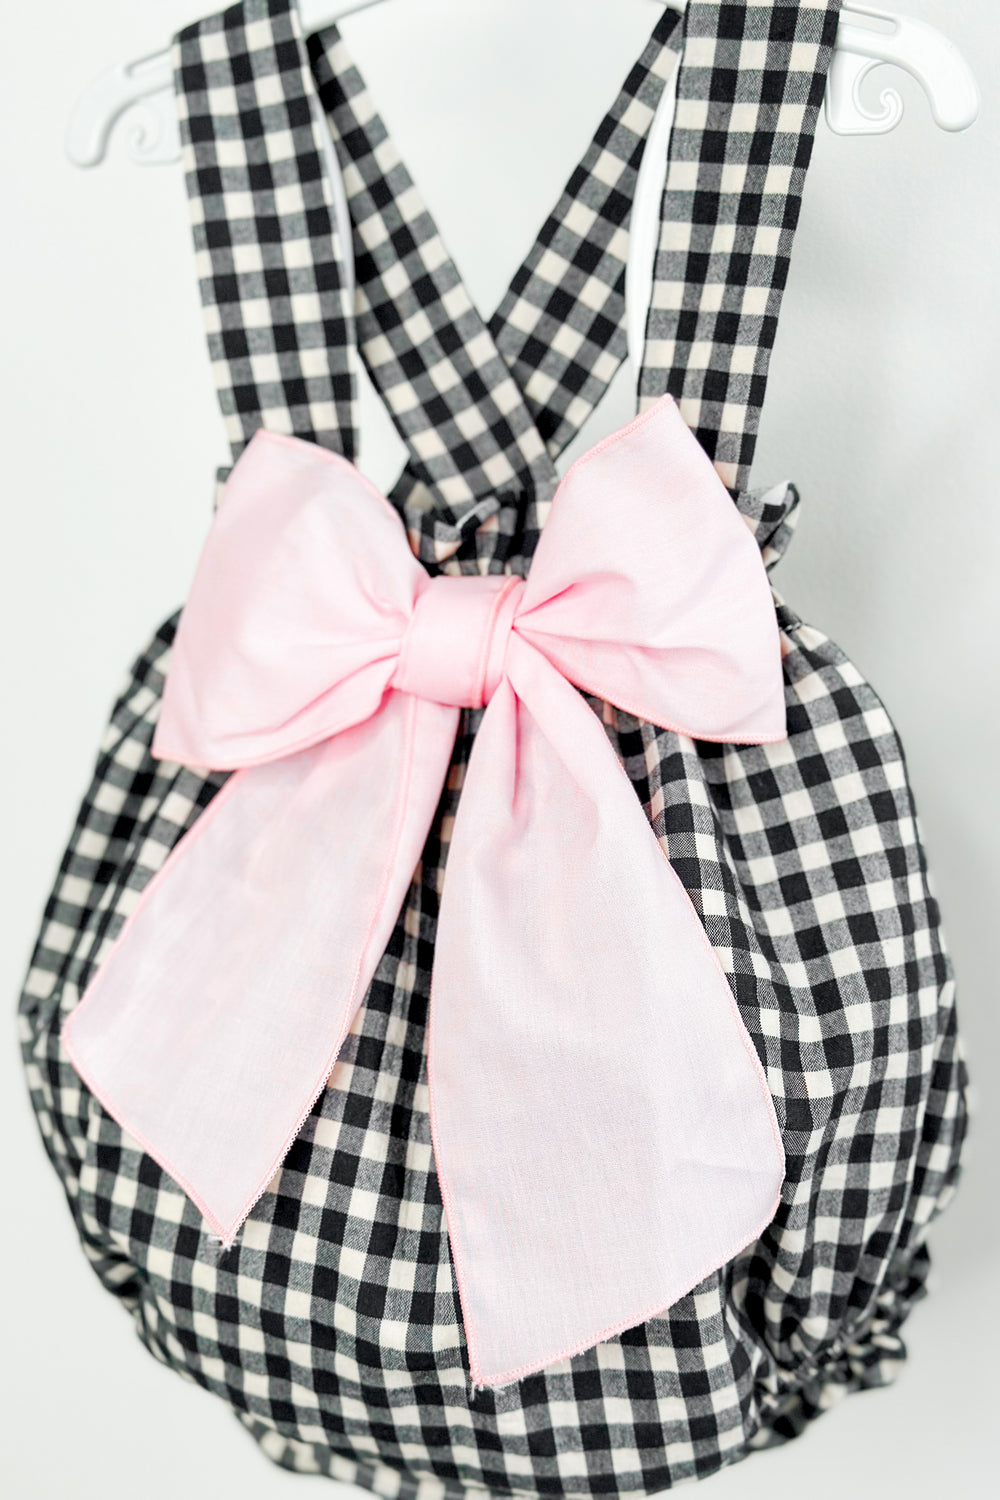 Phi "Indie" Black & White Gingham Pink Bow Shortie | Millie and John